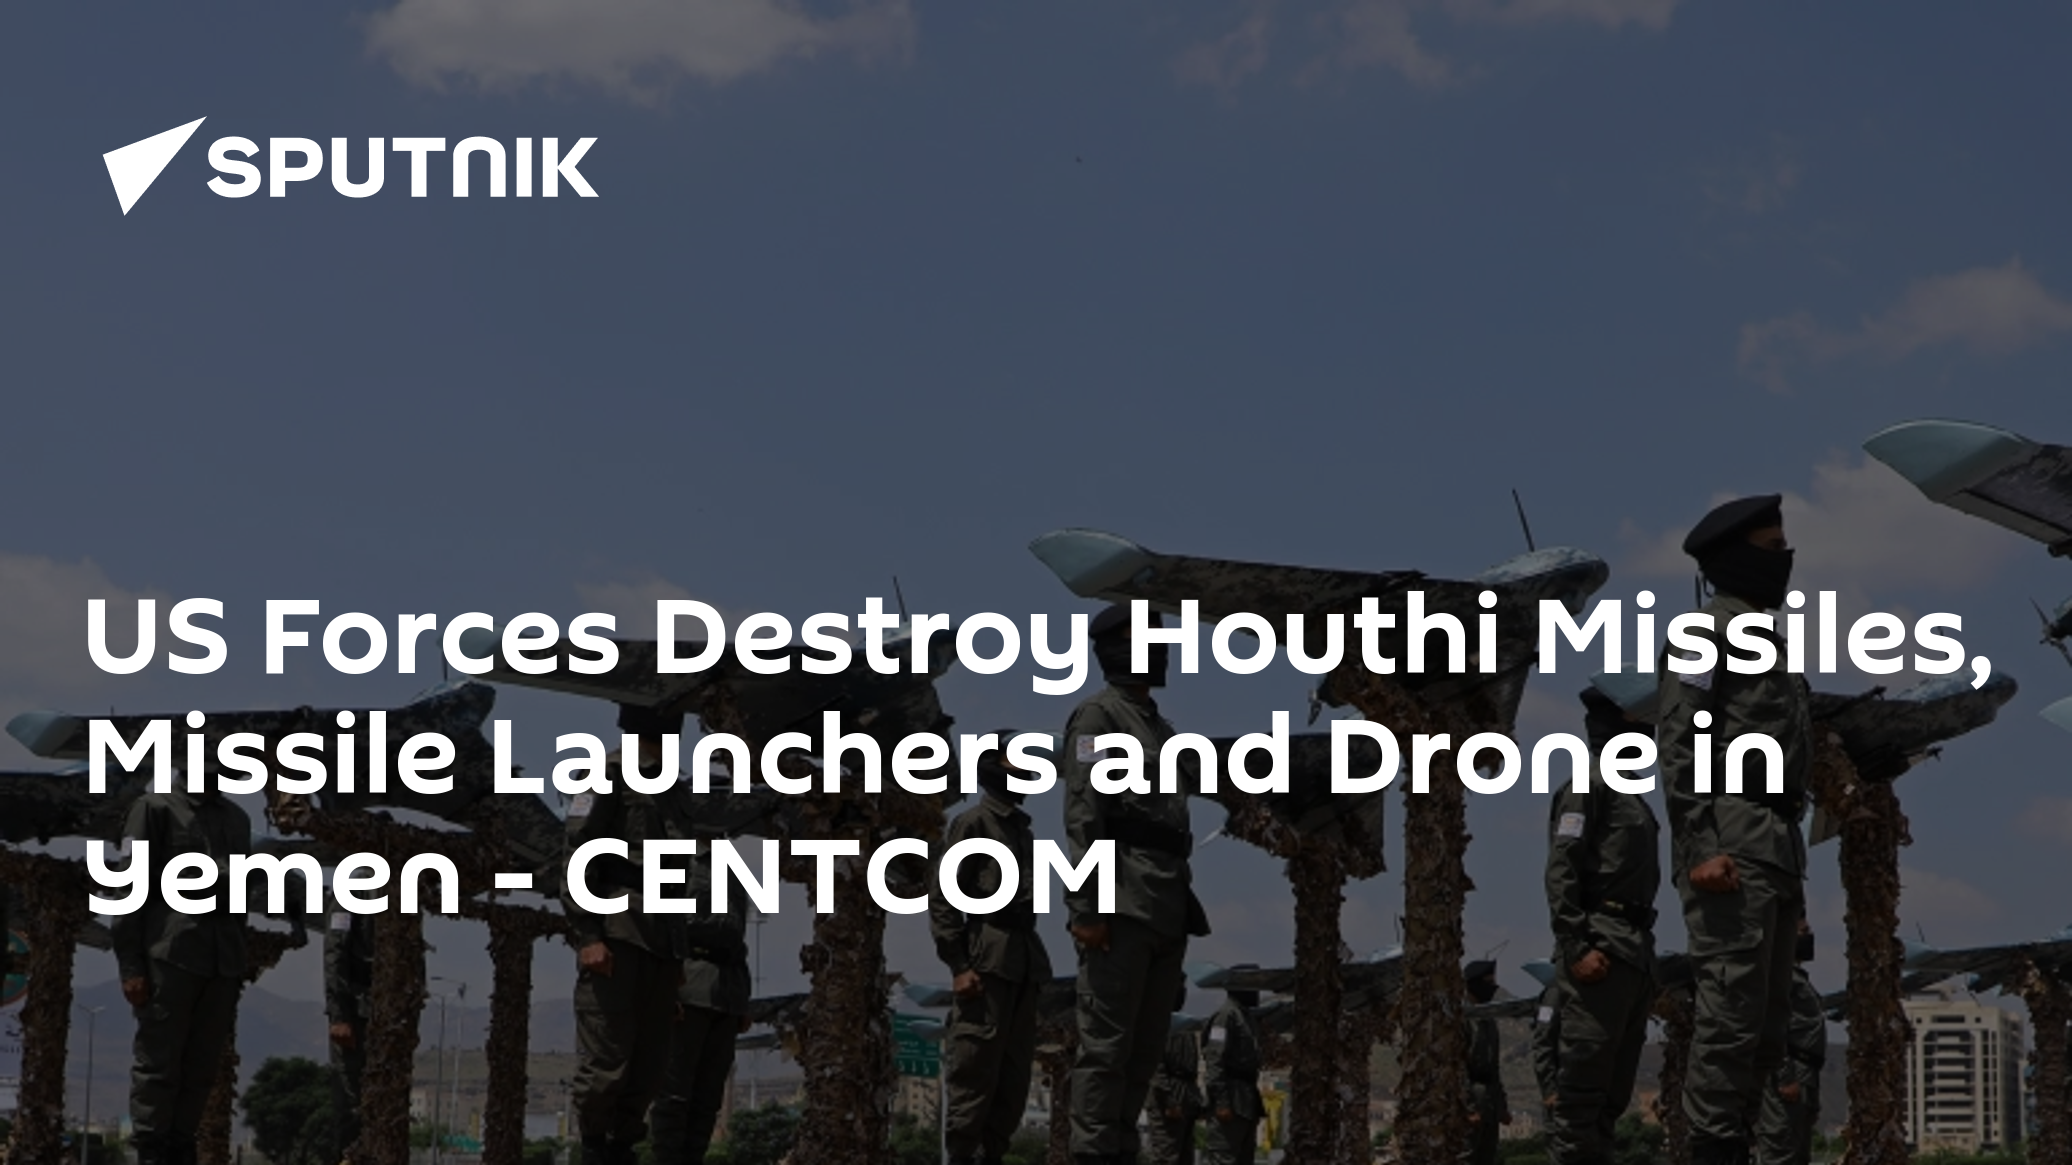 US Forces Destroy Houthi Missiles, Missile Launchers and Drone in Yemen – CENTCOM